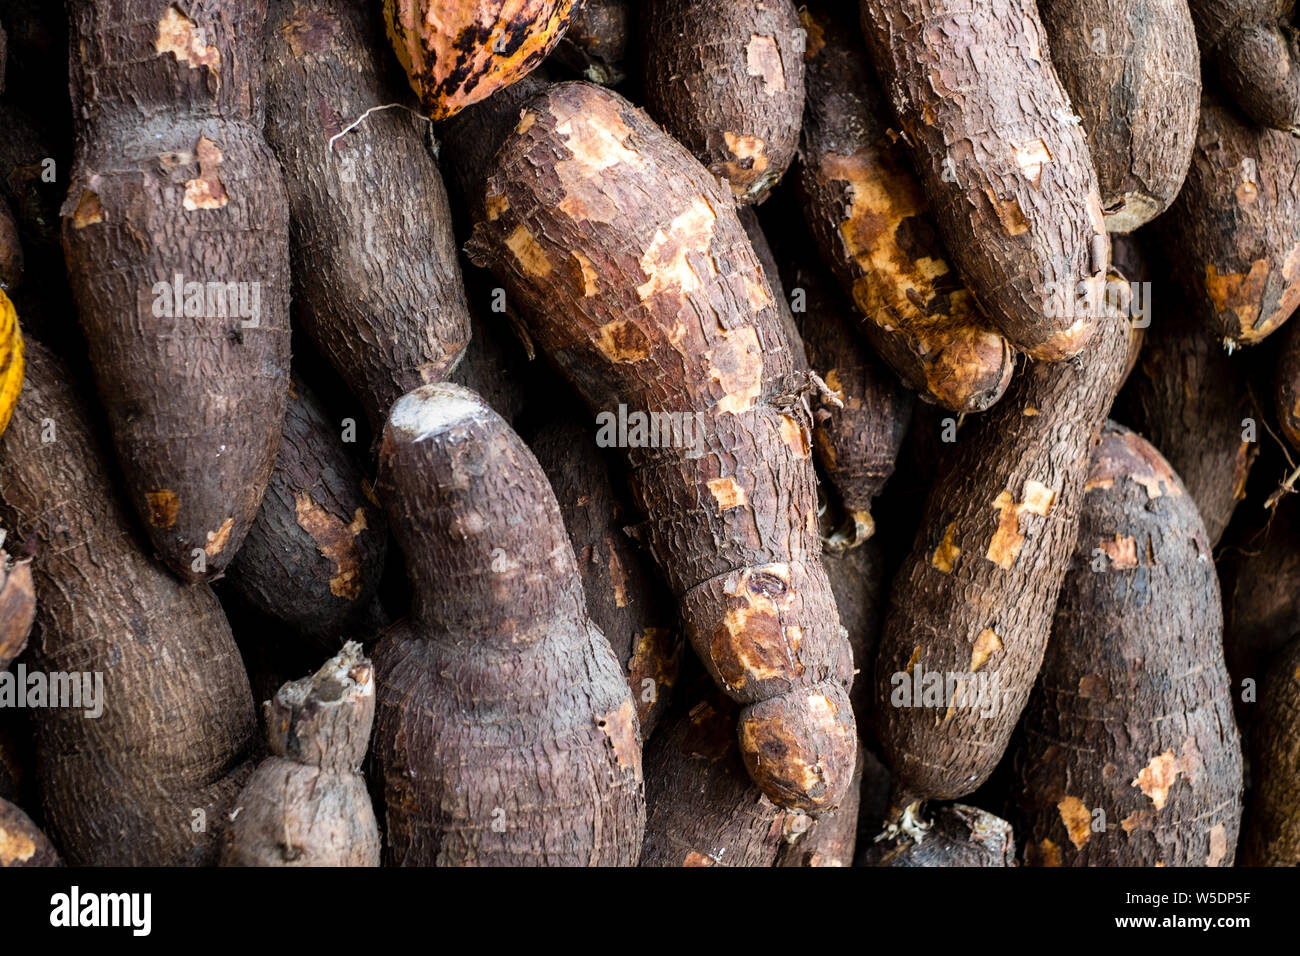 Bunch of freshly harvested Cassava, also called manioc, yuca, balinghoy, mogo, and mandioca. Selective focus. Stock Photo